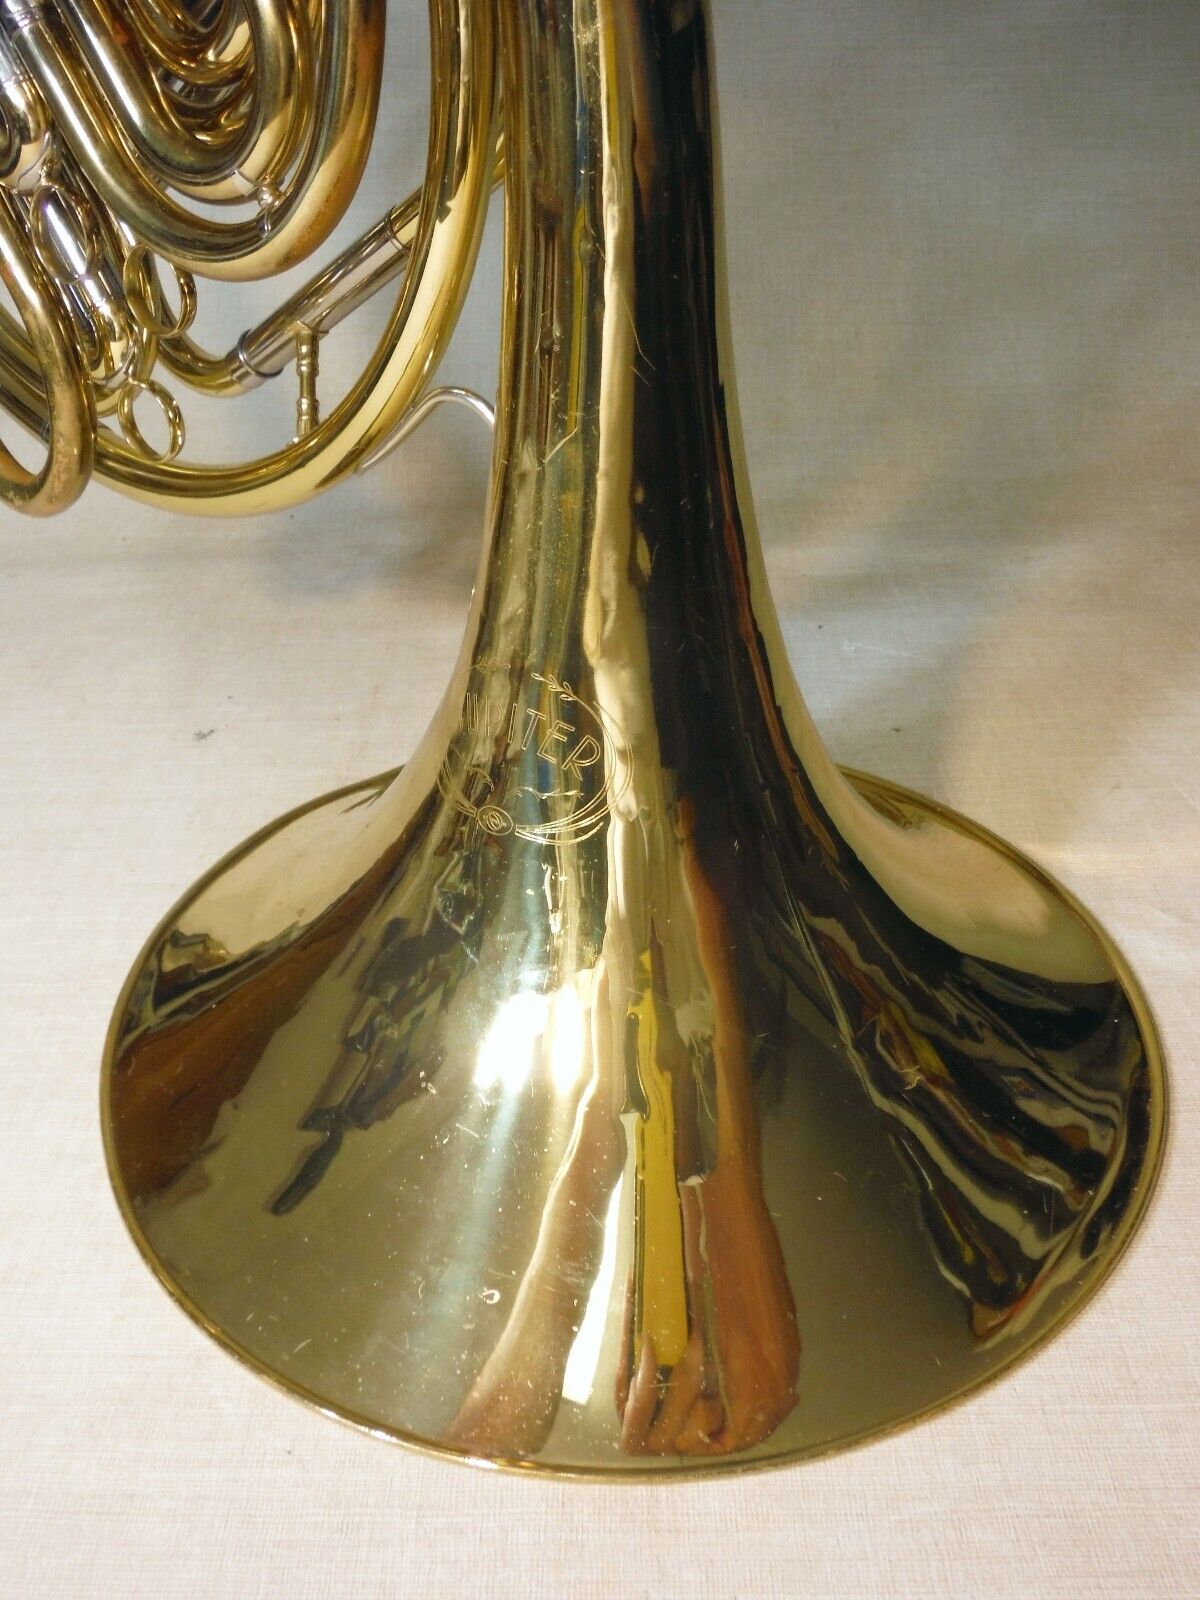 JUPITER JHR-852 DOUBLE FRENCH HORN BRASS WORKING GOOD W/DENTS CASE MOUTHPIECE 16